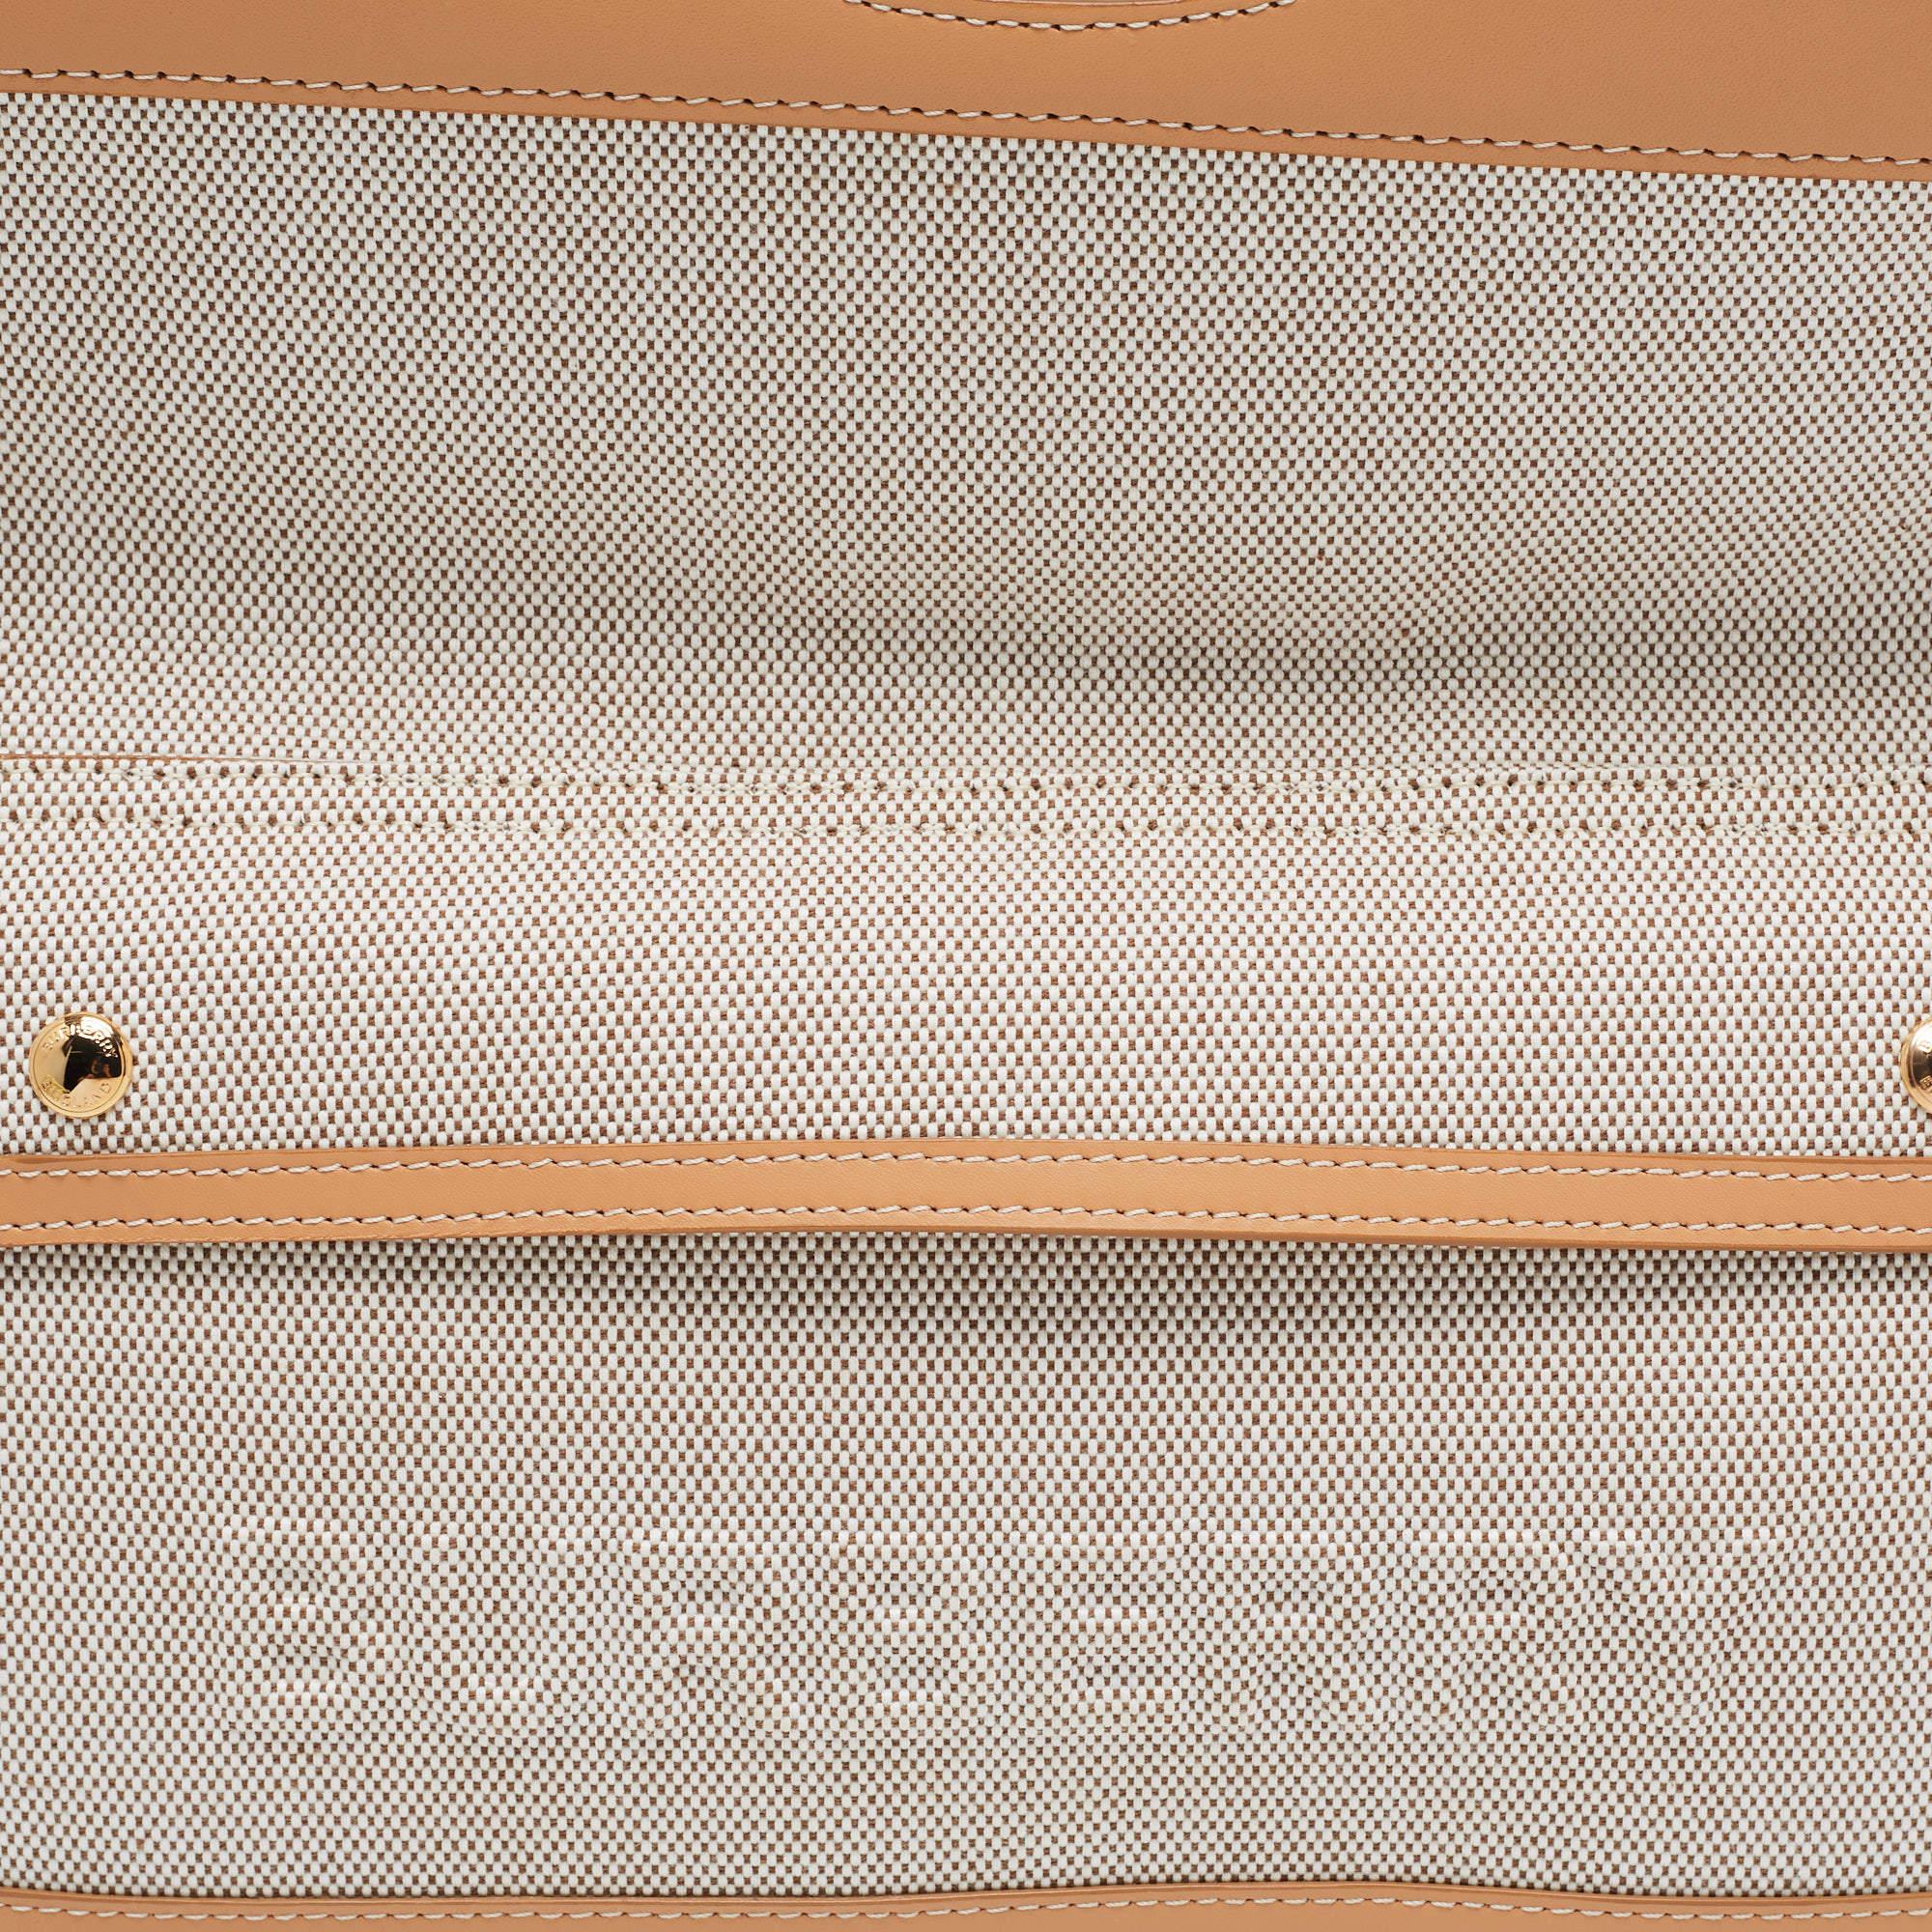 Burberry Beige/Tan Canvas and Leather Small Pocket Strap Clutch 6